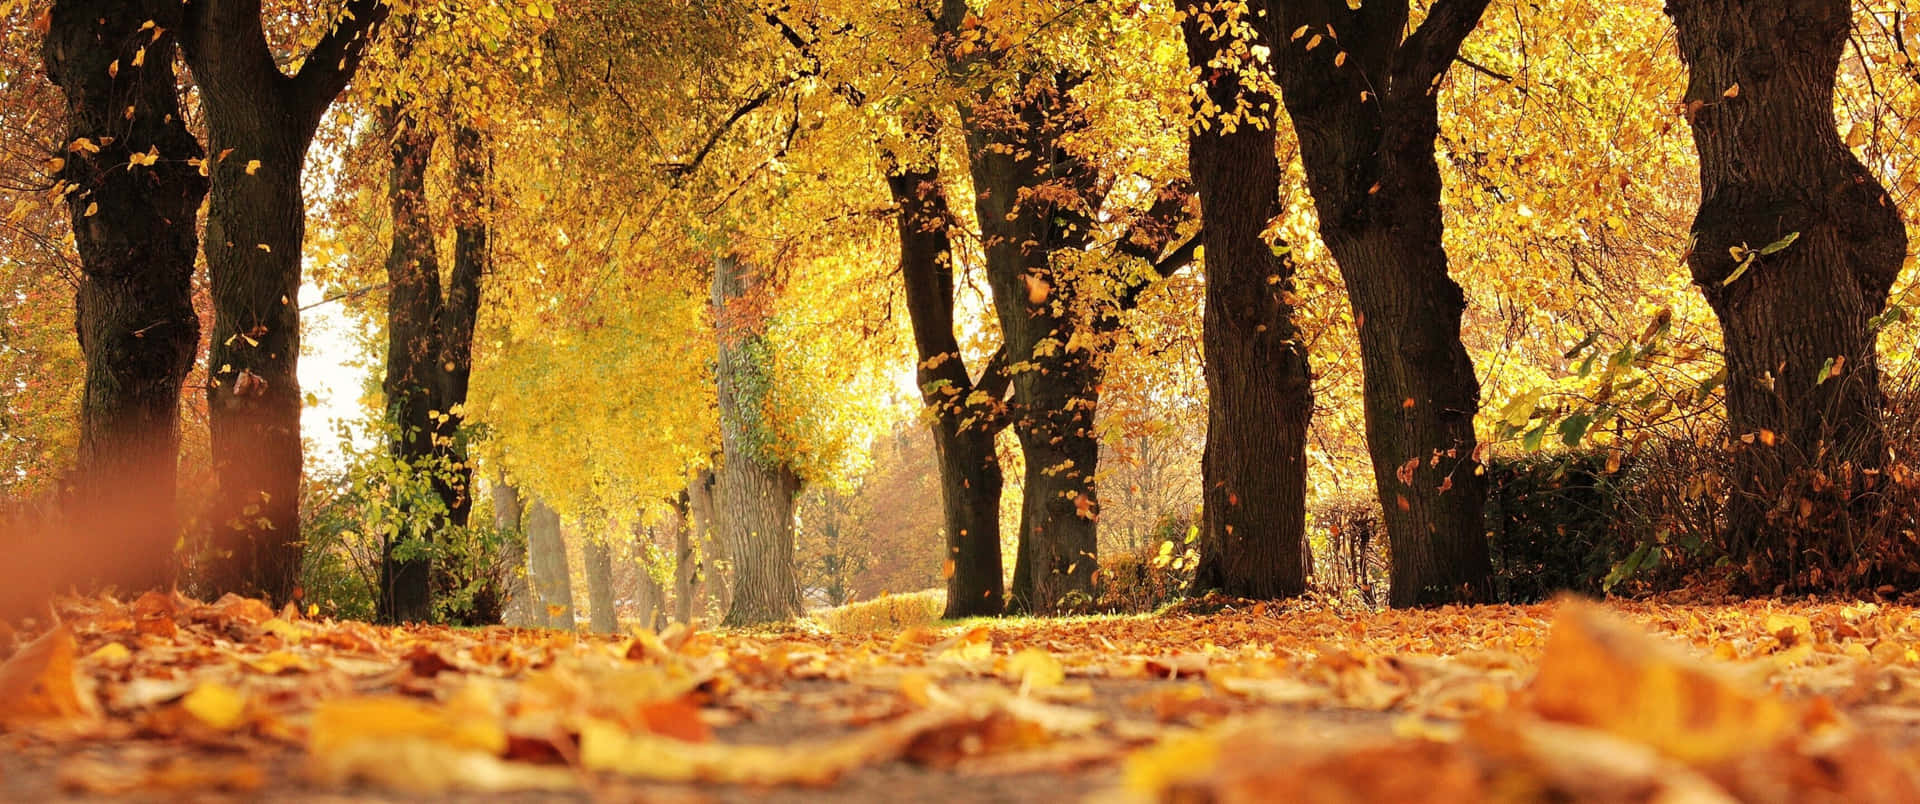 A mesmerizing view of a fall morning Wallpaper